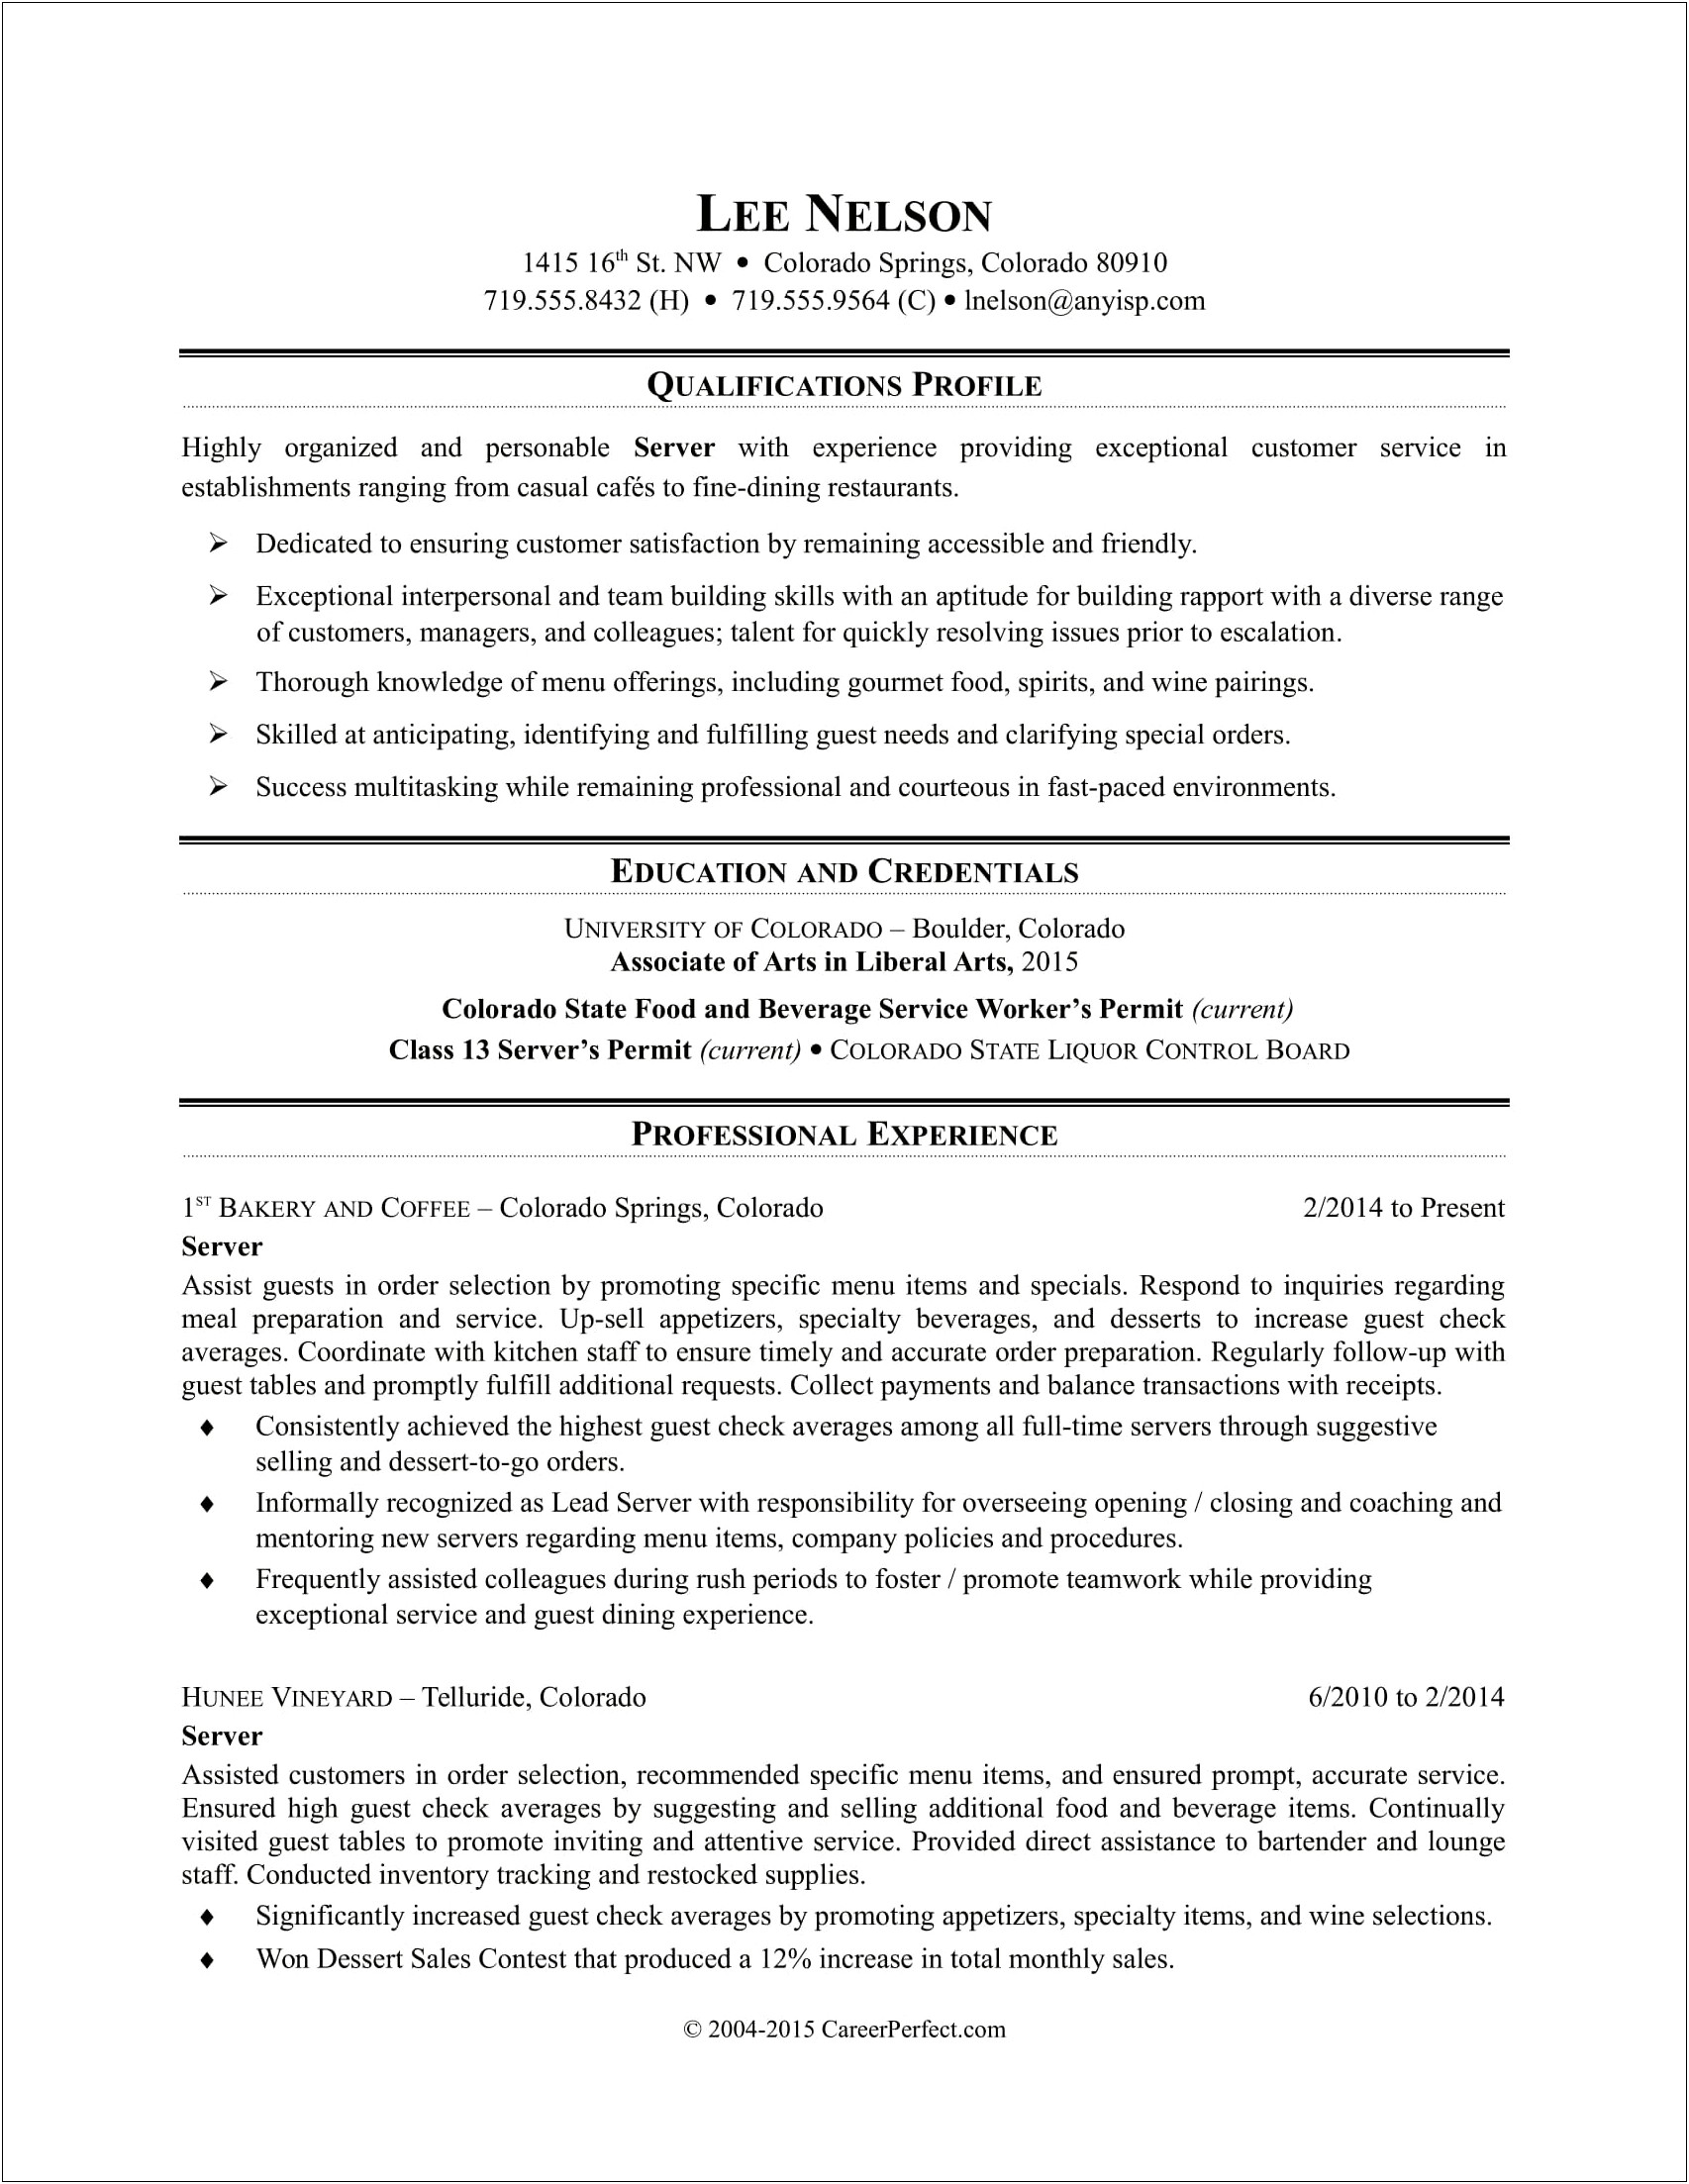 Hostess Skills And Abilities For Resume